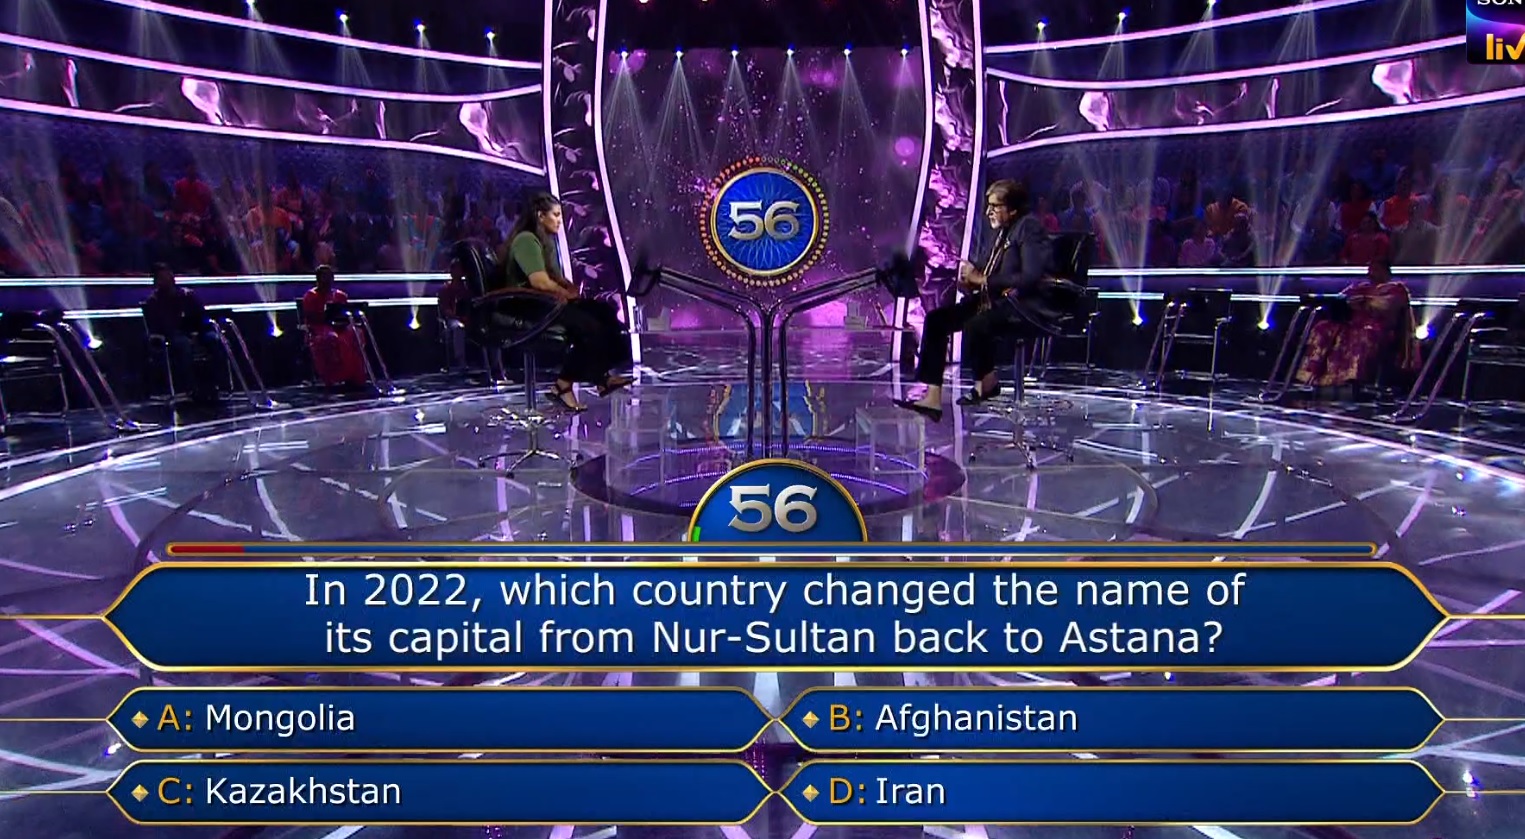 Ques : In 2022, which country changed the name of its capital from Nur-Sultan back to Astana?